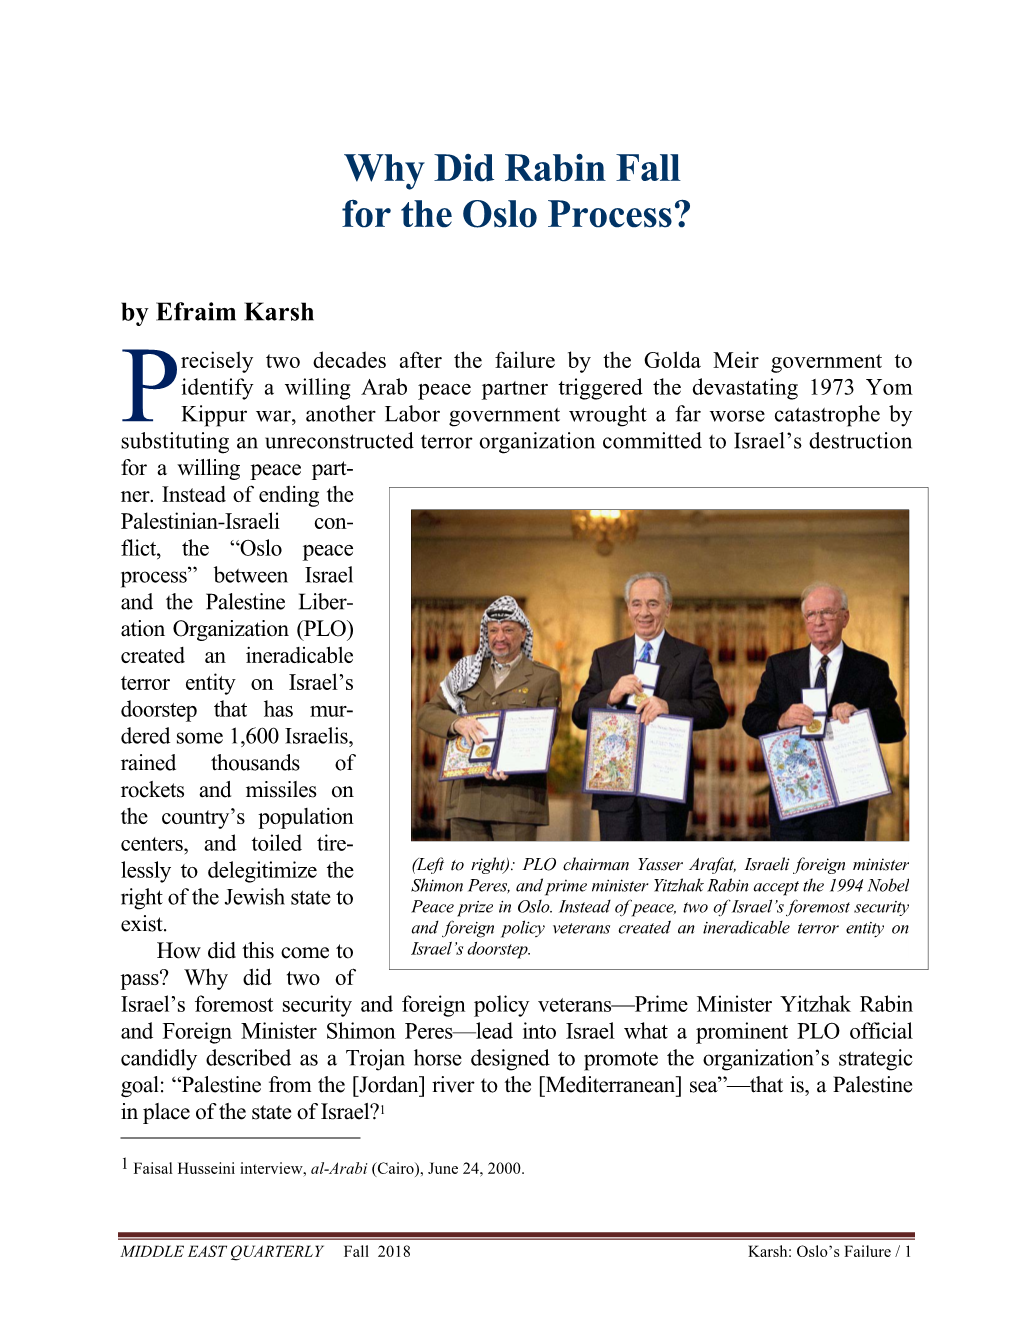 Why Did Rabin Fall for the Oslo Process? by Efraim Karsh